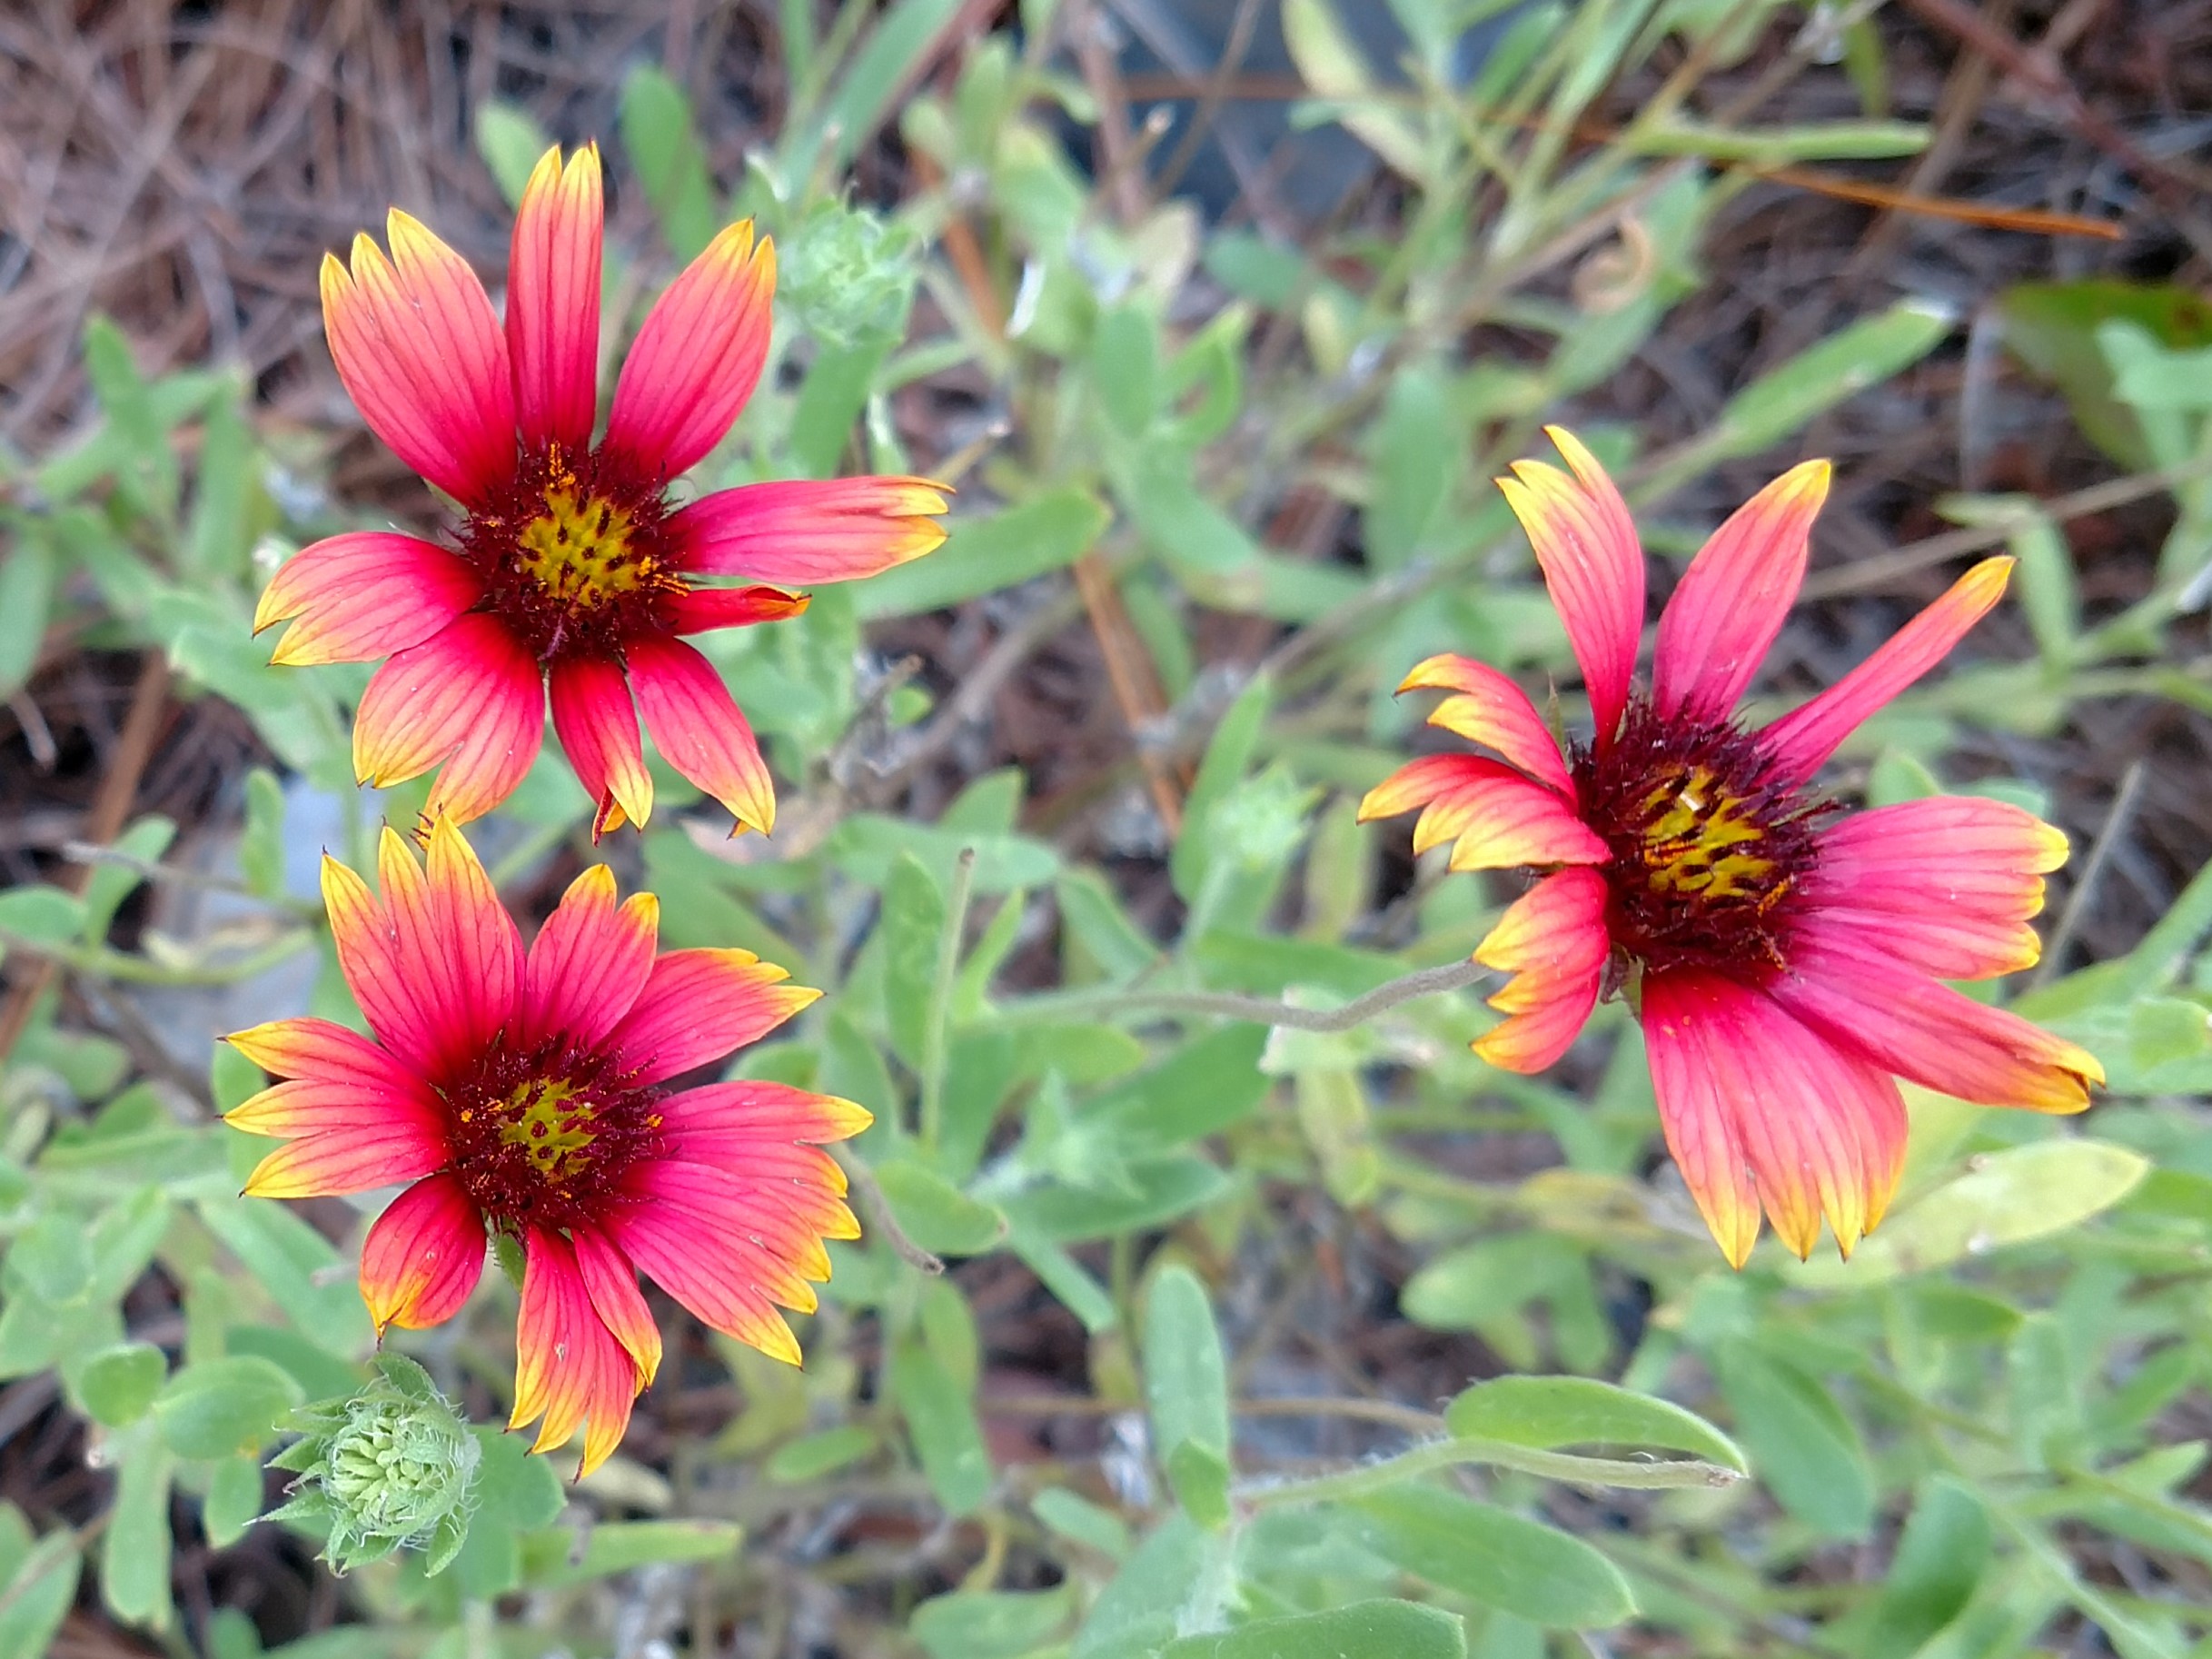 The Scientific Name is Gaillardia pulchella var. drummondii. You will likely hear them called Beach Blanket-flower. This picture shows the Close-up of spectacular blooms of Gaillardia pulchella var. drummondii